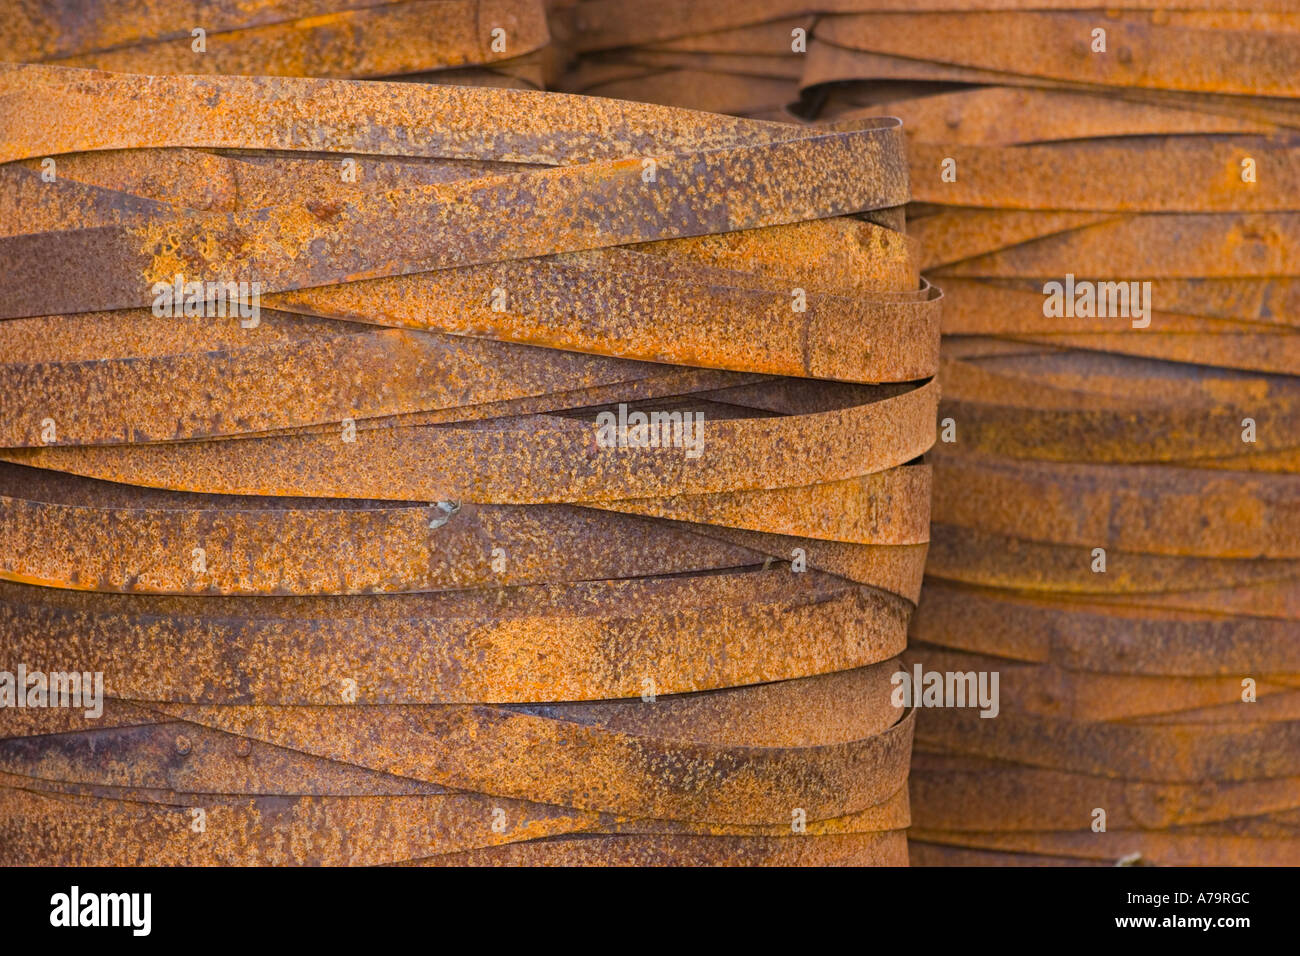 Rusting hoops used to repair barrels in the manufacture of Scotland Whisky barrels at Speyside cooperage Dufftown Scotland uk Stock Photo